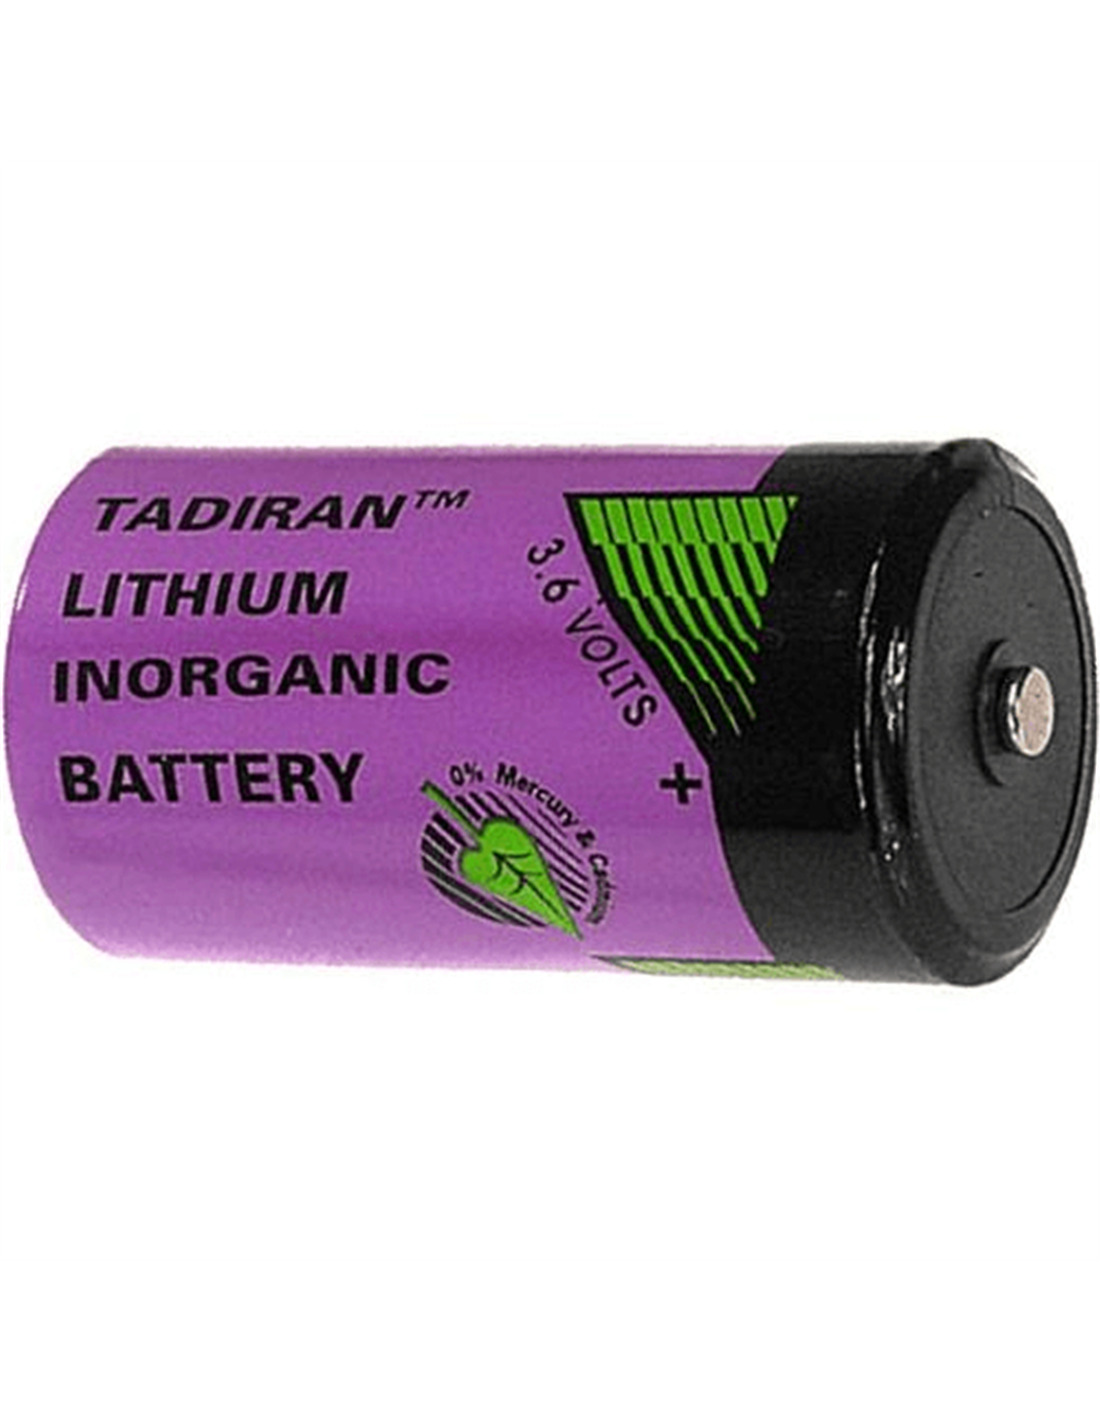 Tadiran TL-4920/S XOL Series 3.6V C Size 8500Mah Lithium Battery replaces ER26500 & LS26500 3.6V - Non Rechargeable